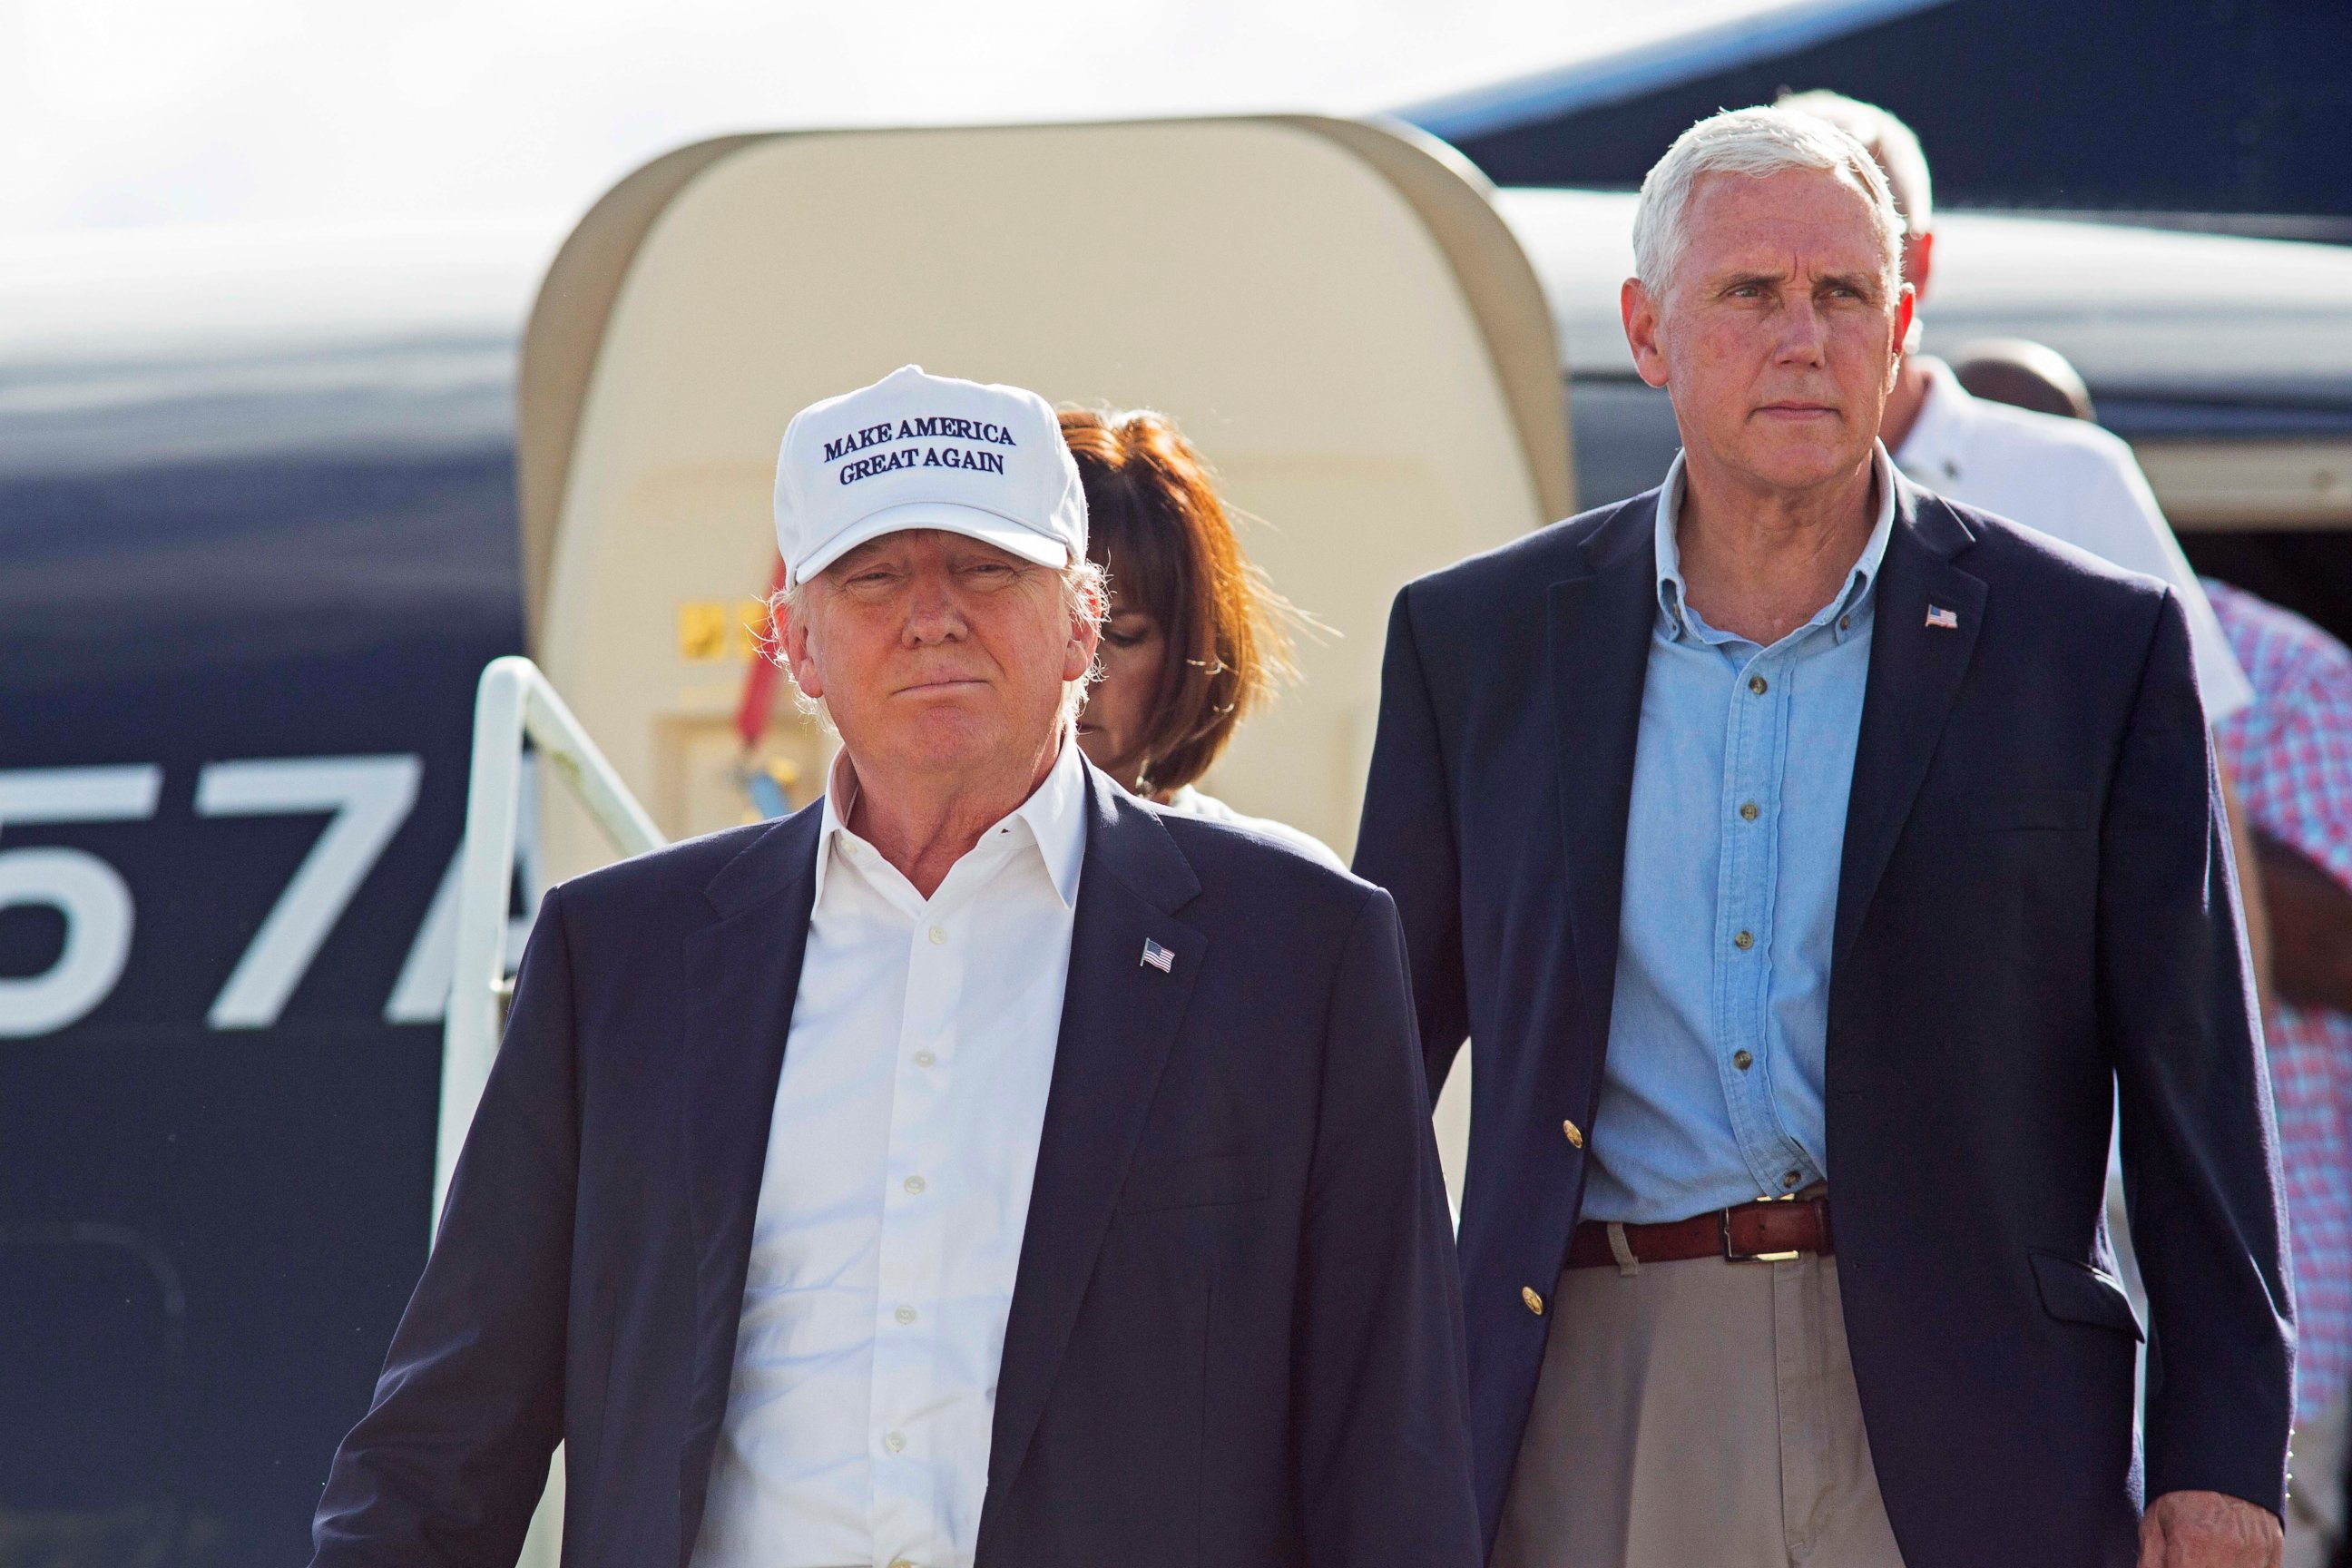 PHOTO: Republican presidential candidate Donald Trump, followed by his running mate, Indiana Gov. Mike Pence, emerges from his plane as he arrives to tour the flood damaged city of Baton Rouge, La., Aug. 19, 2016.